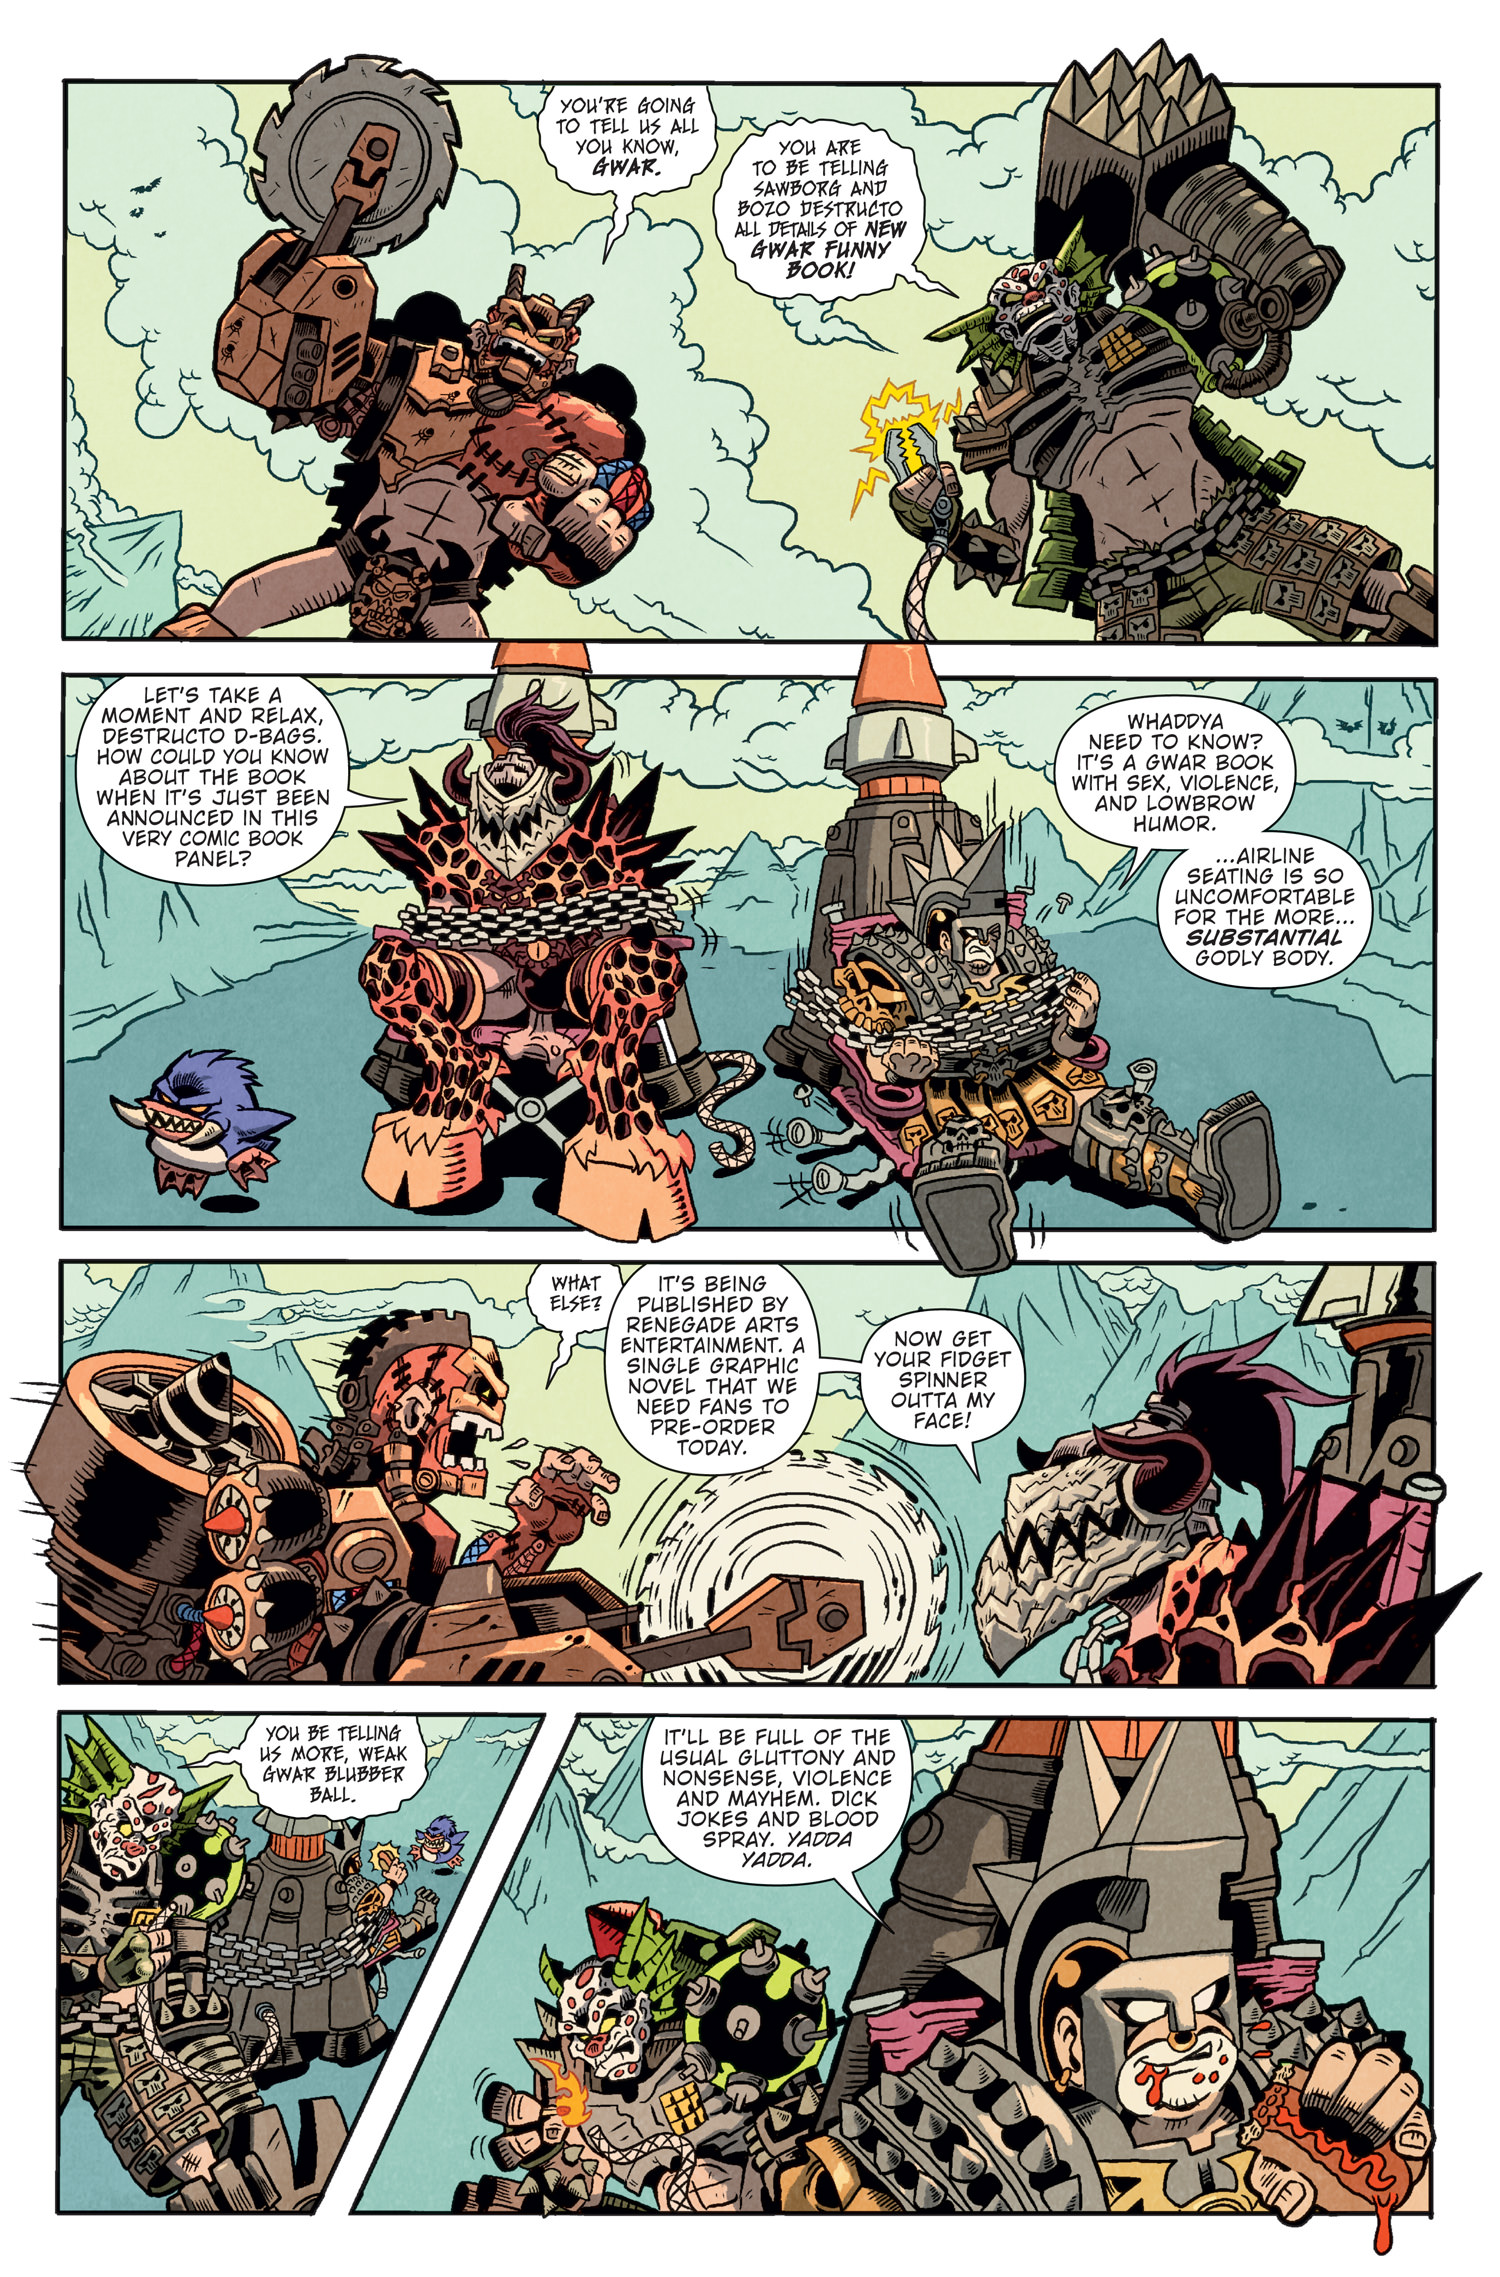 NEW GWAR GRAPHIC NOVEL TO SPLIT HELL WIDE OPEN - PRE-ORDERS AVAILABLE NOW!